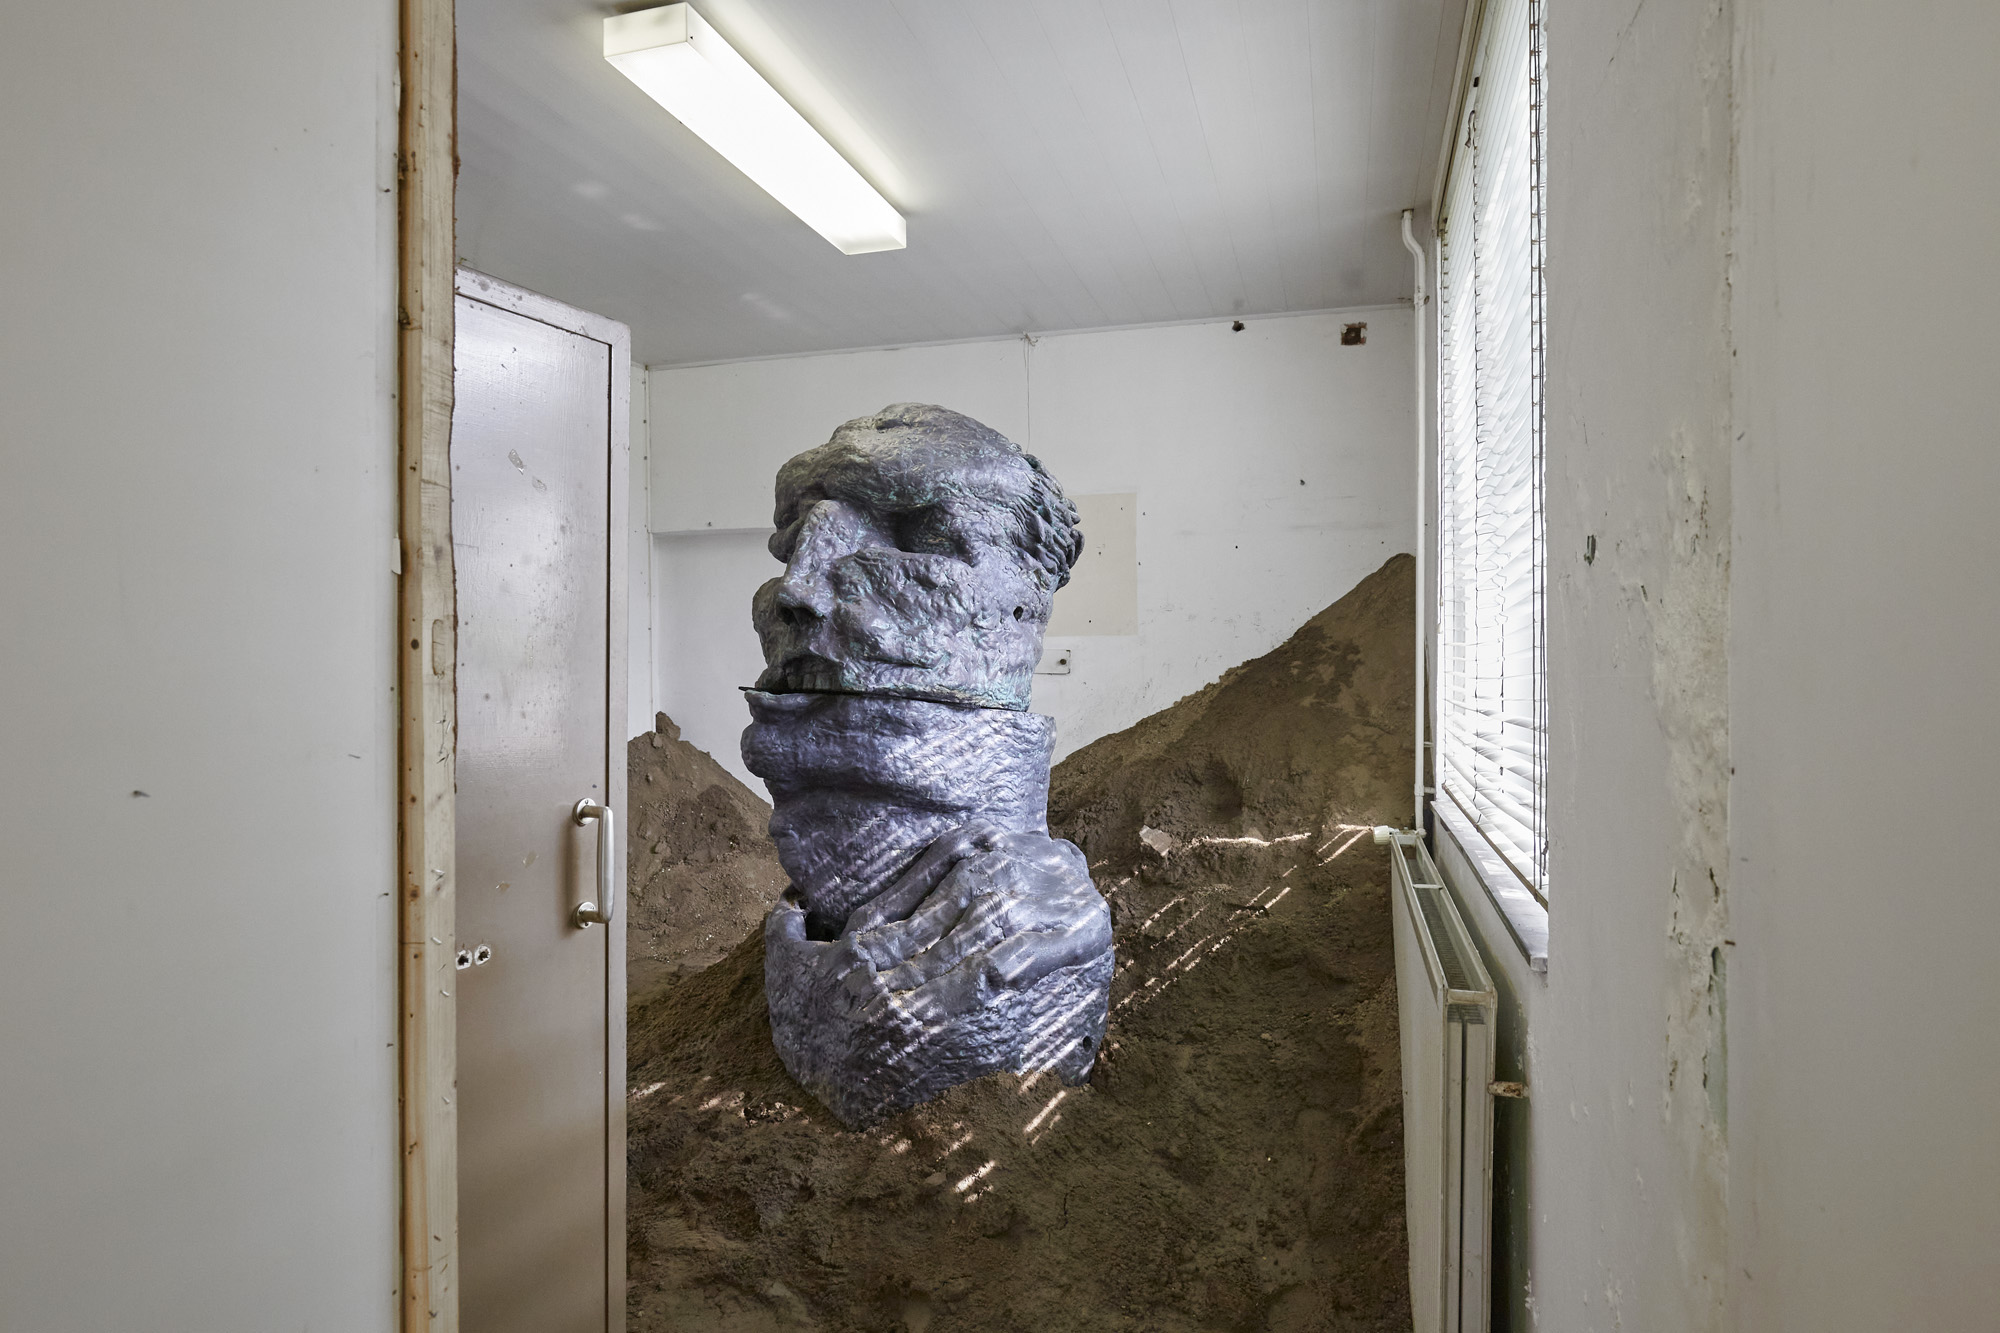 Sculpture depicting of an upper body of a person, installed in a pile of sand in a white room.